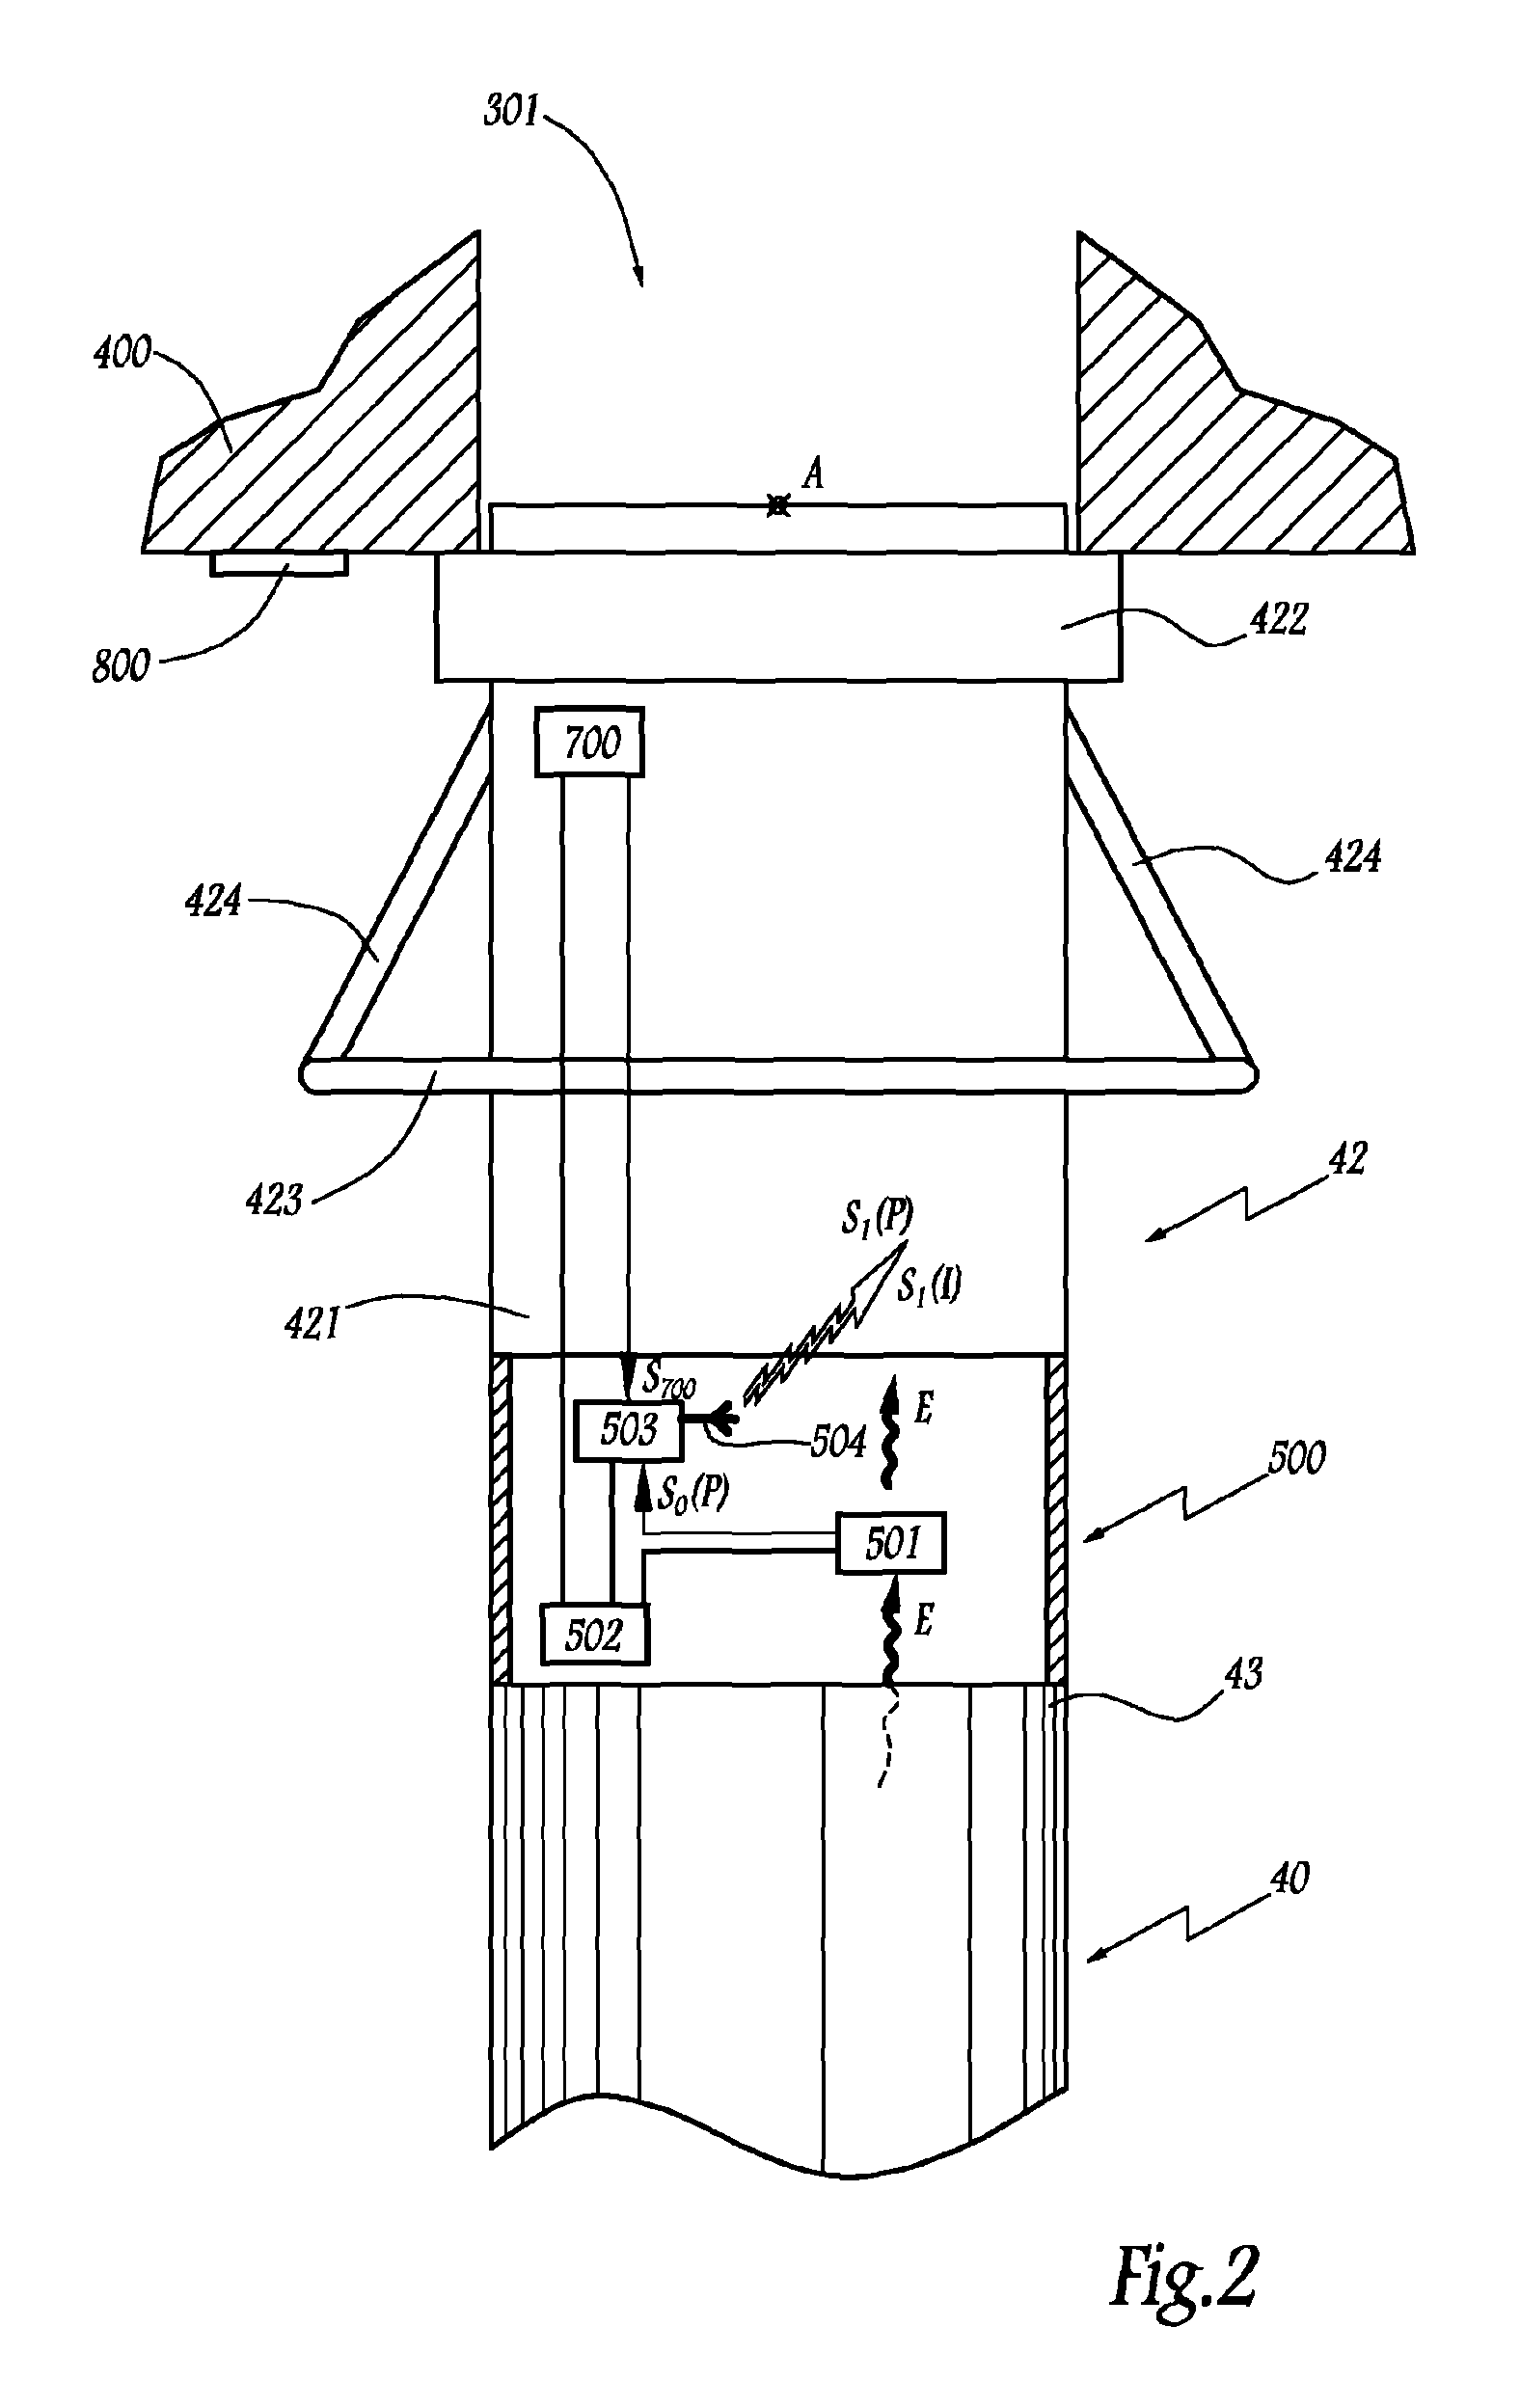 Refueling equipment, and method for refueling an aircraft using said equipment